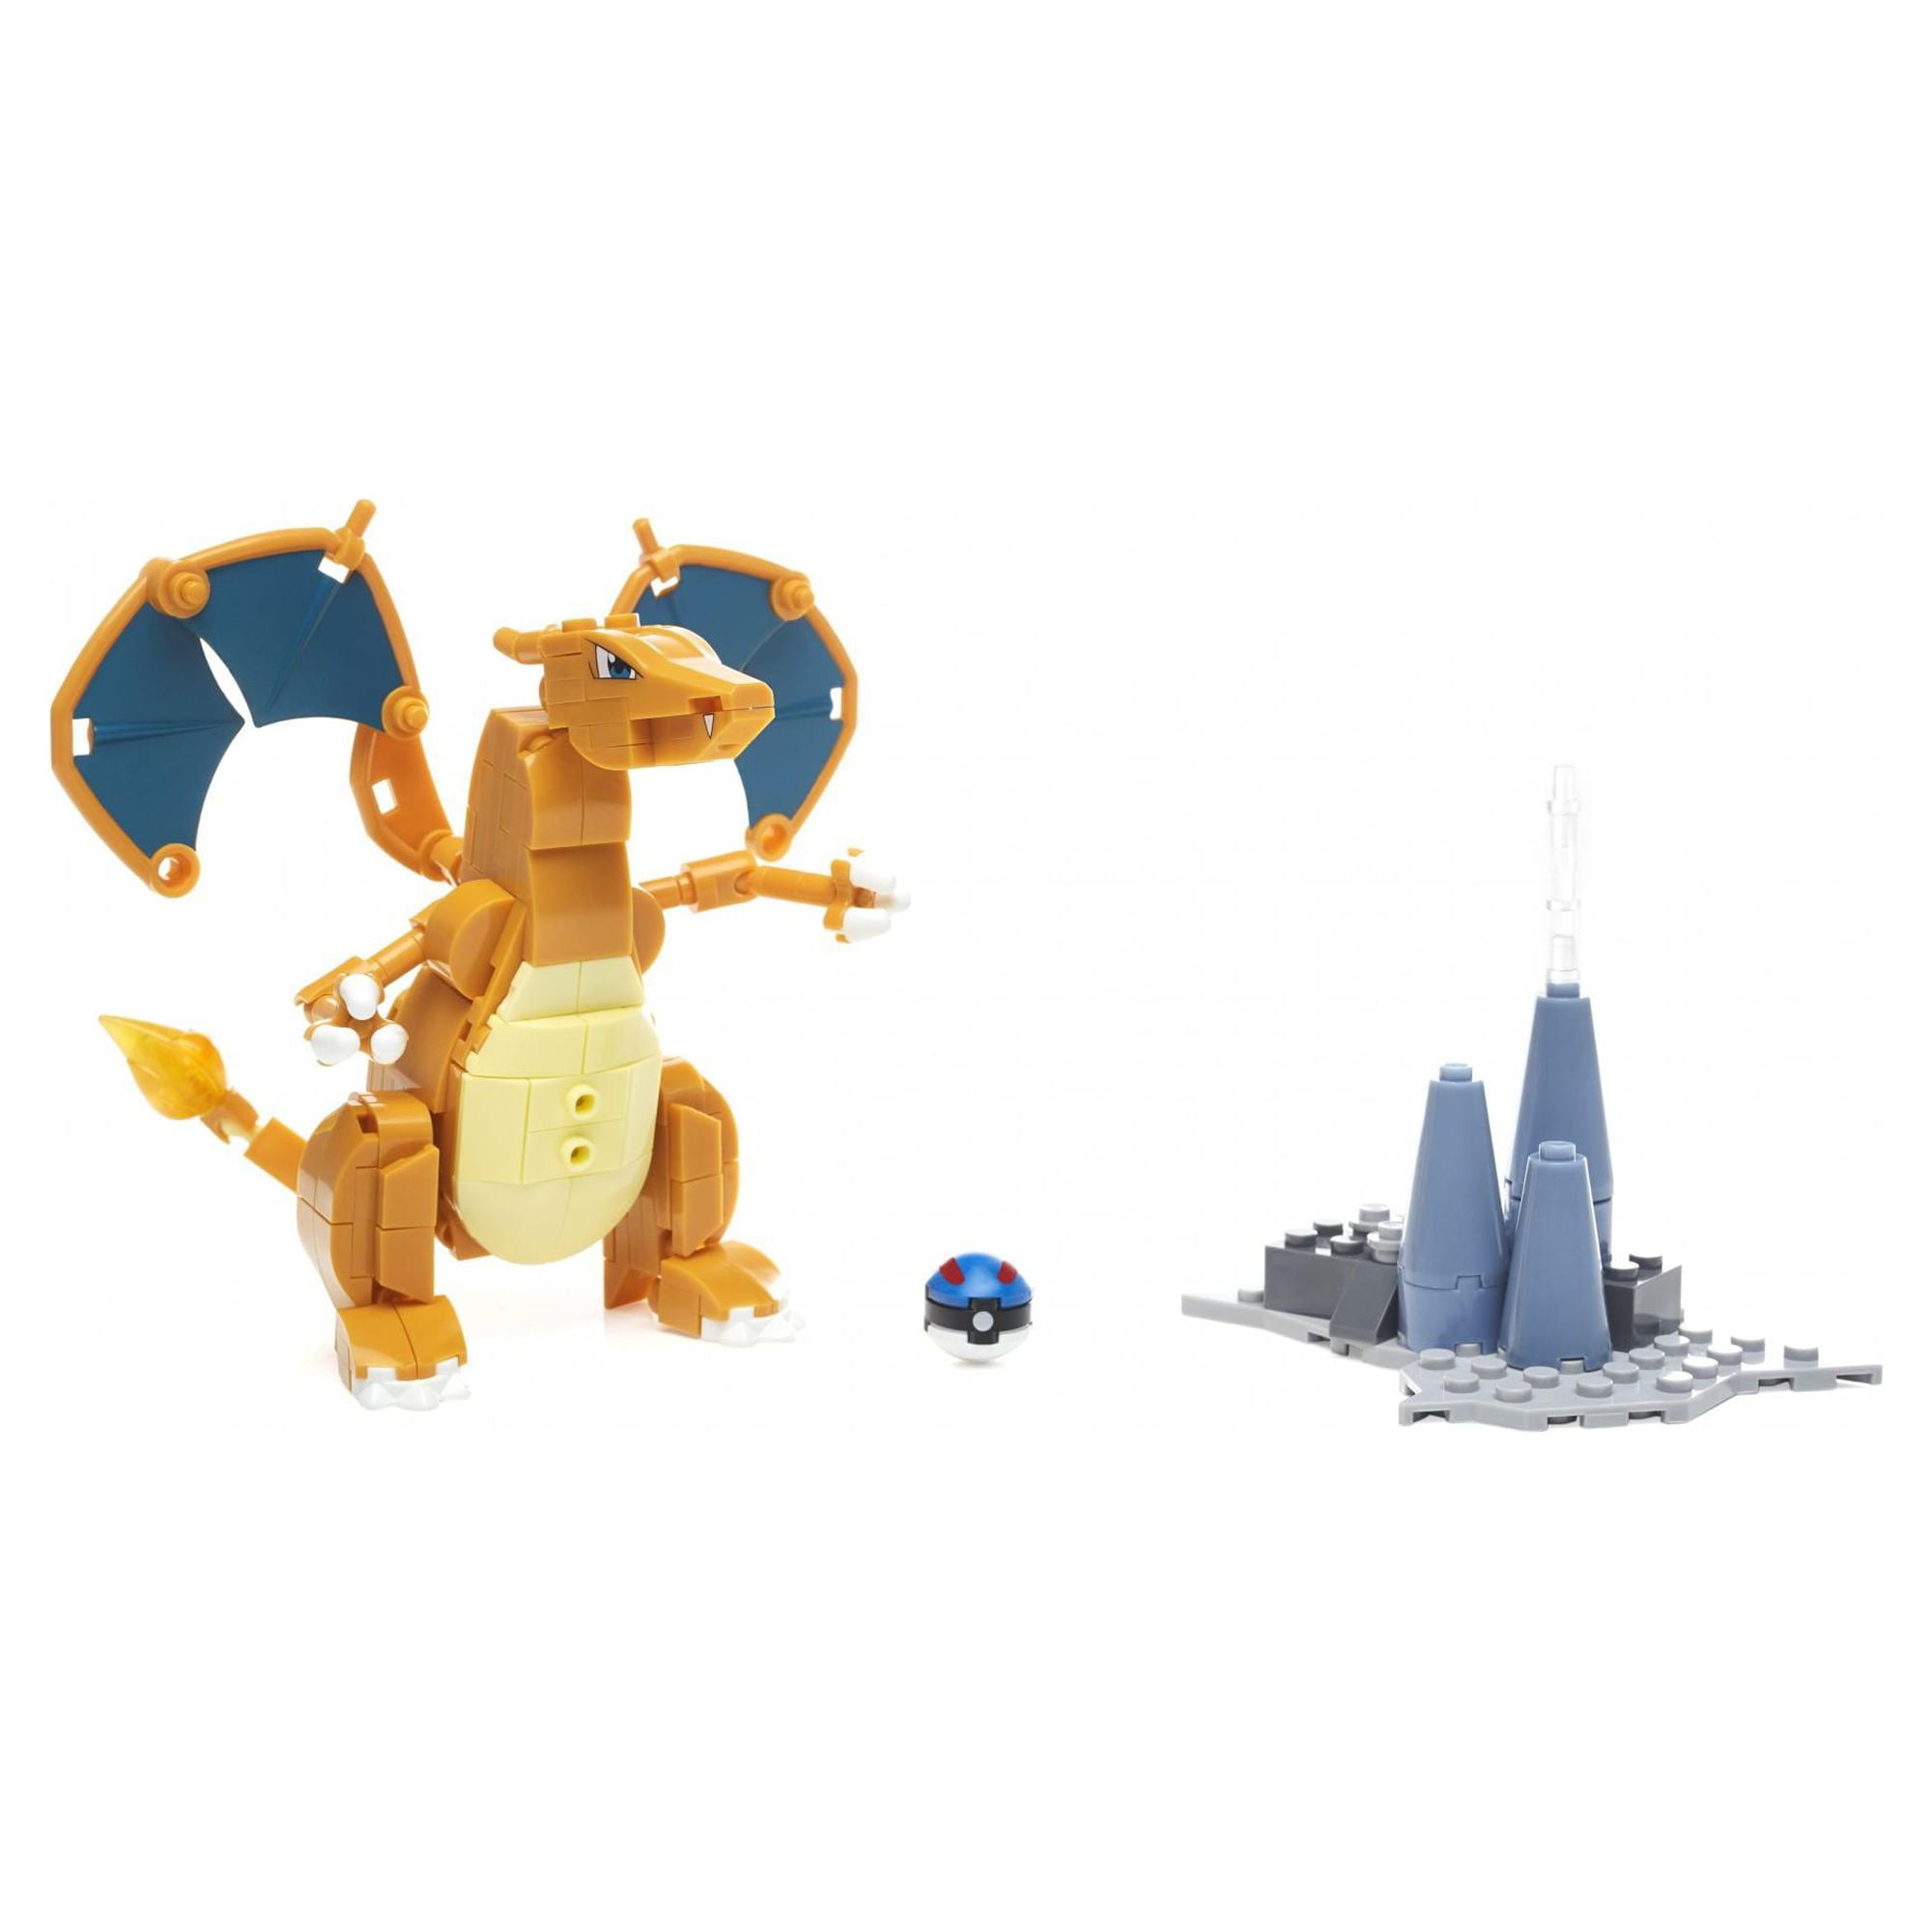 Mega Construx Pokemon Mew Construction Set with character figures, Building  Toys for Kids (194 Pieces) 